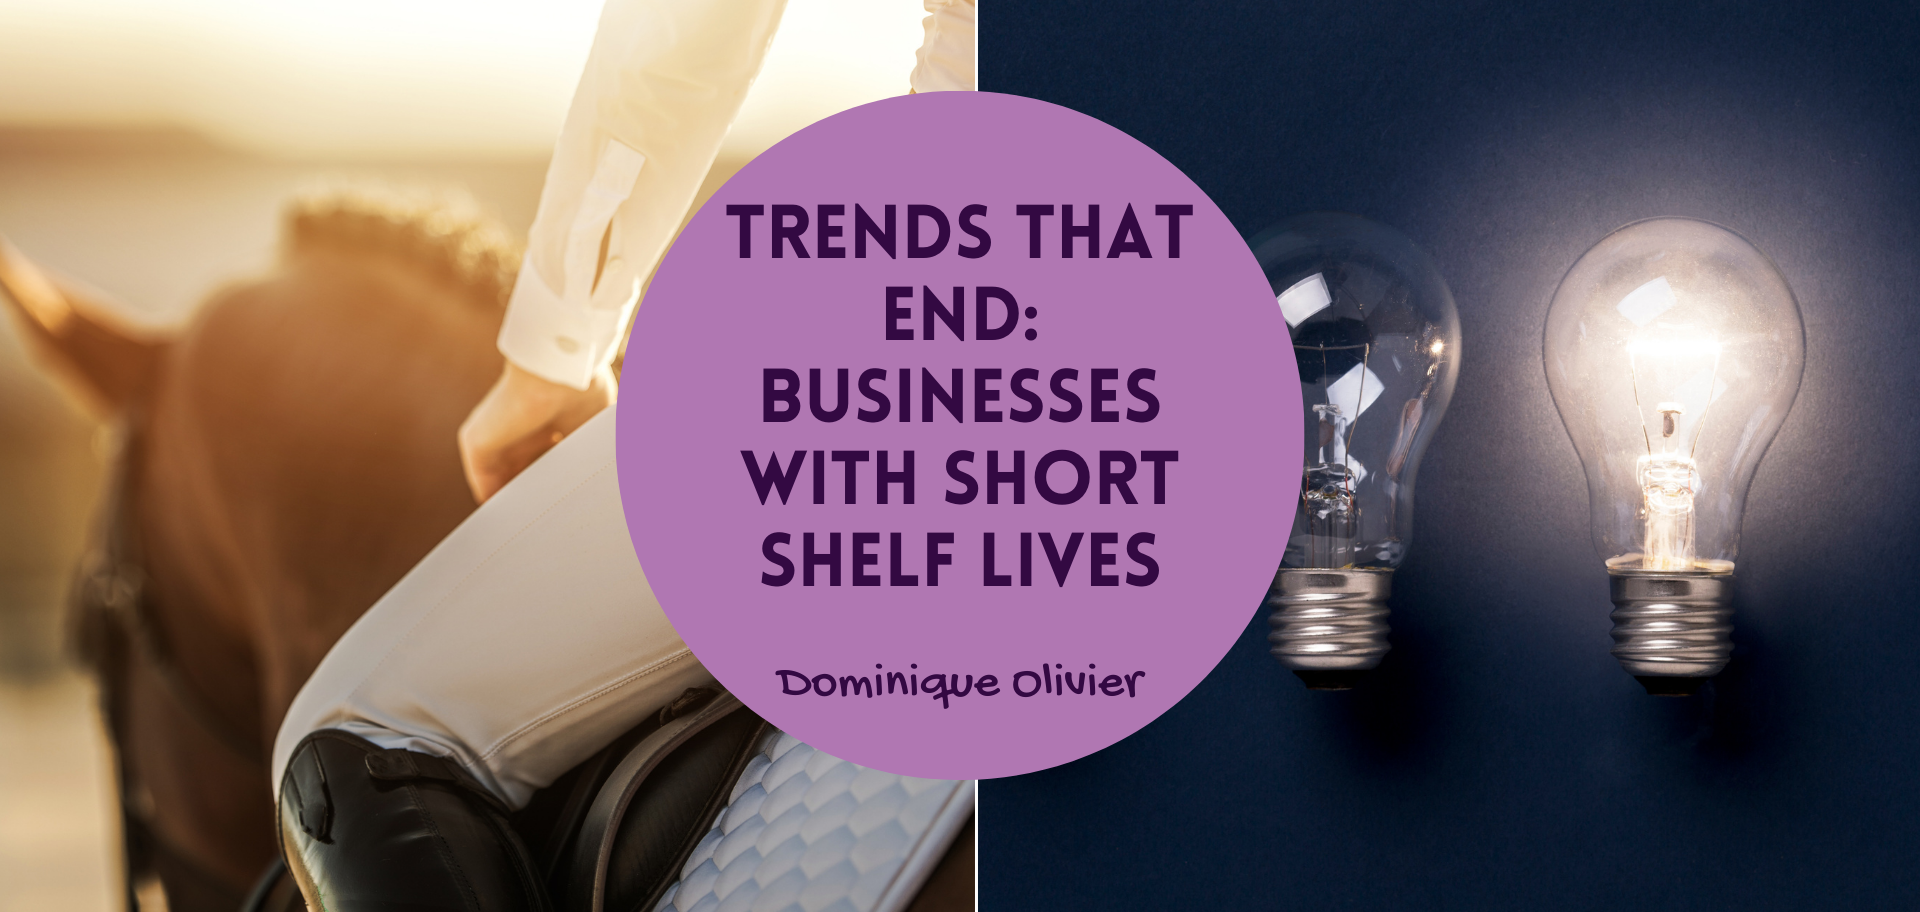 Trends that end: businesses with short shelf lives